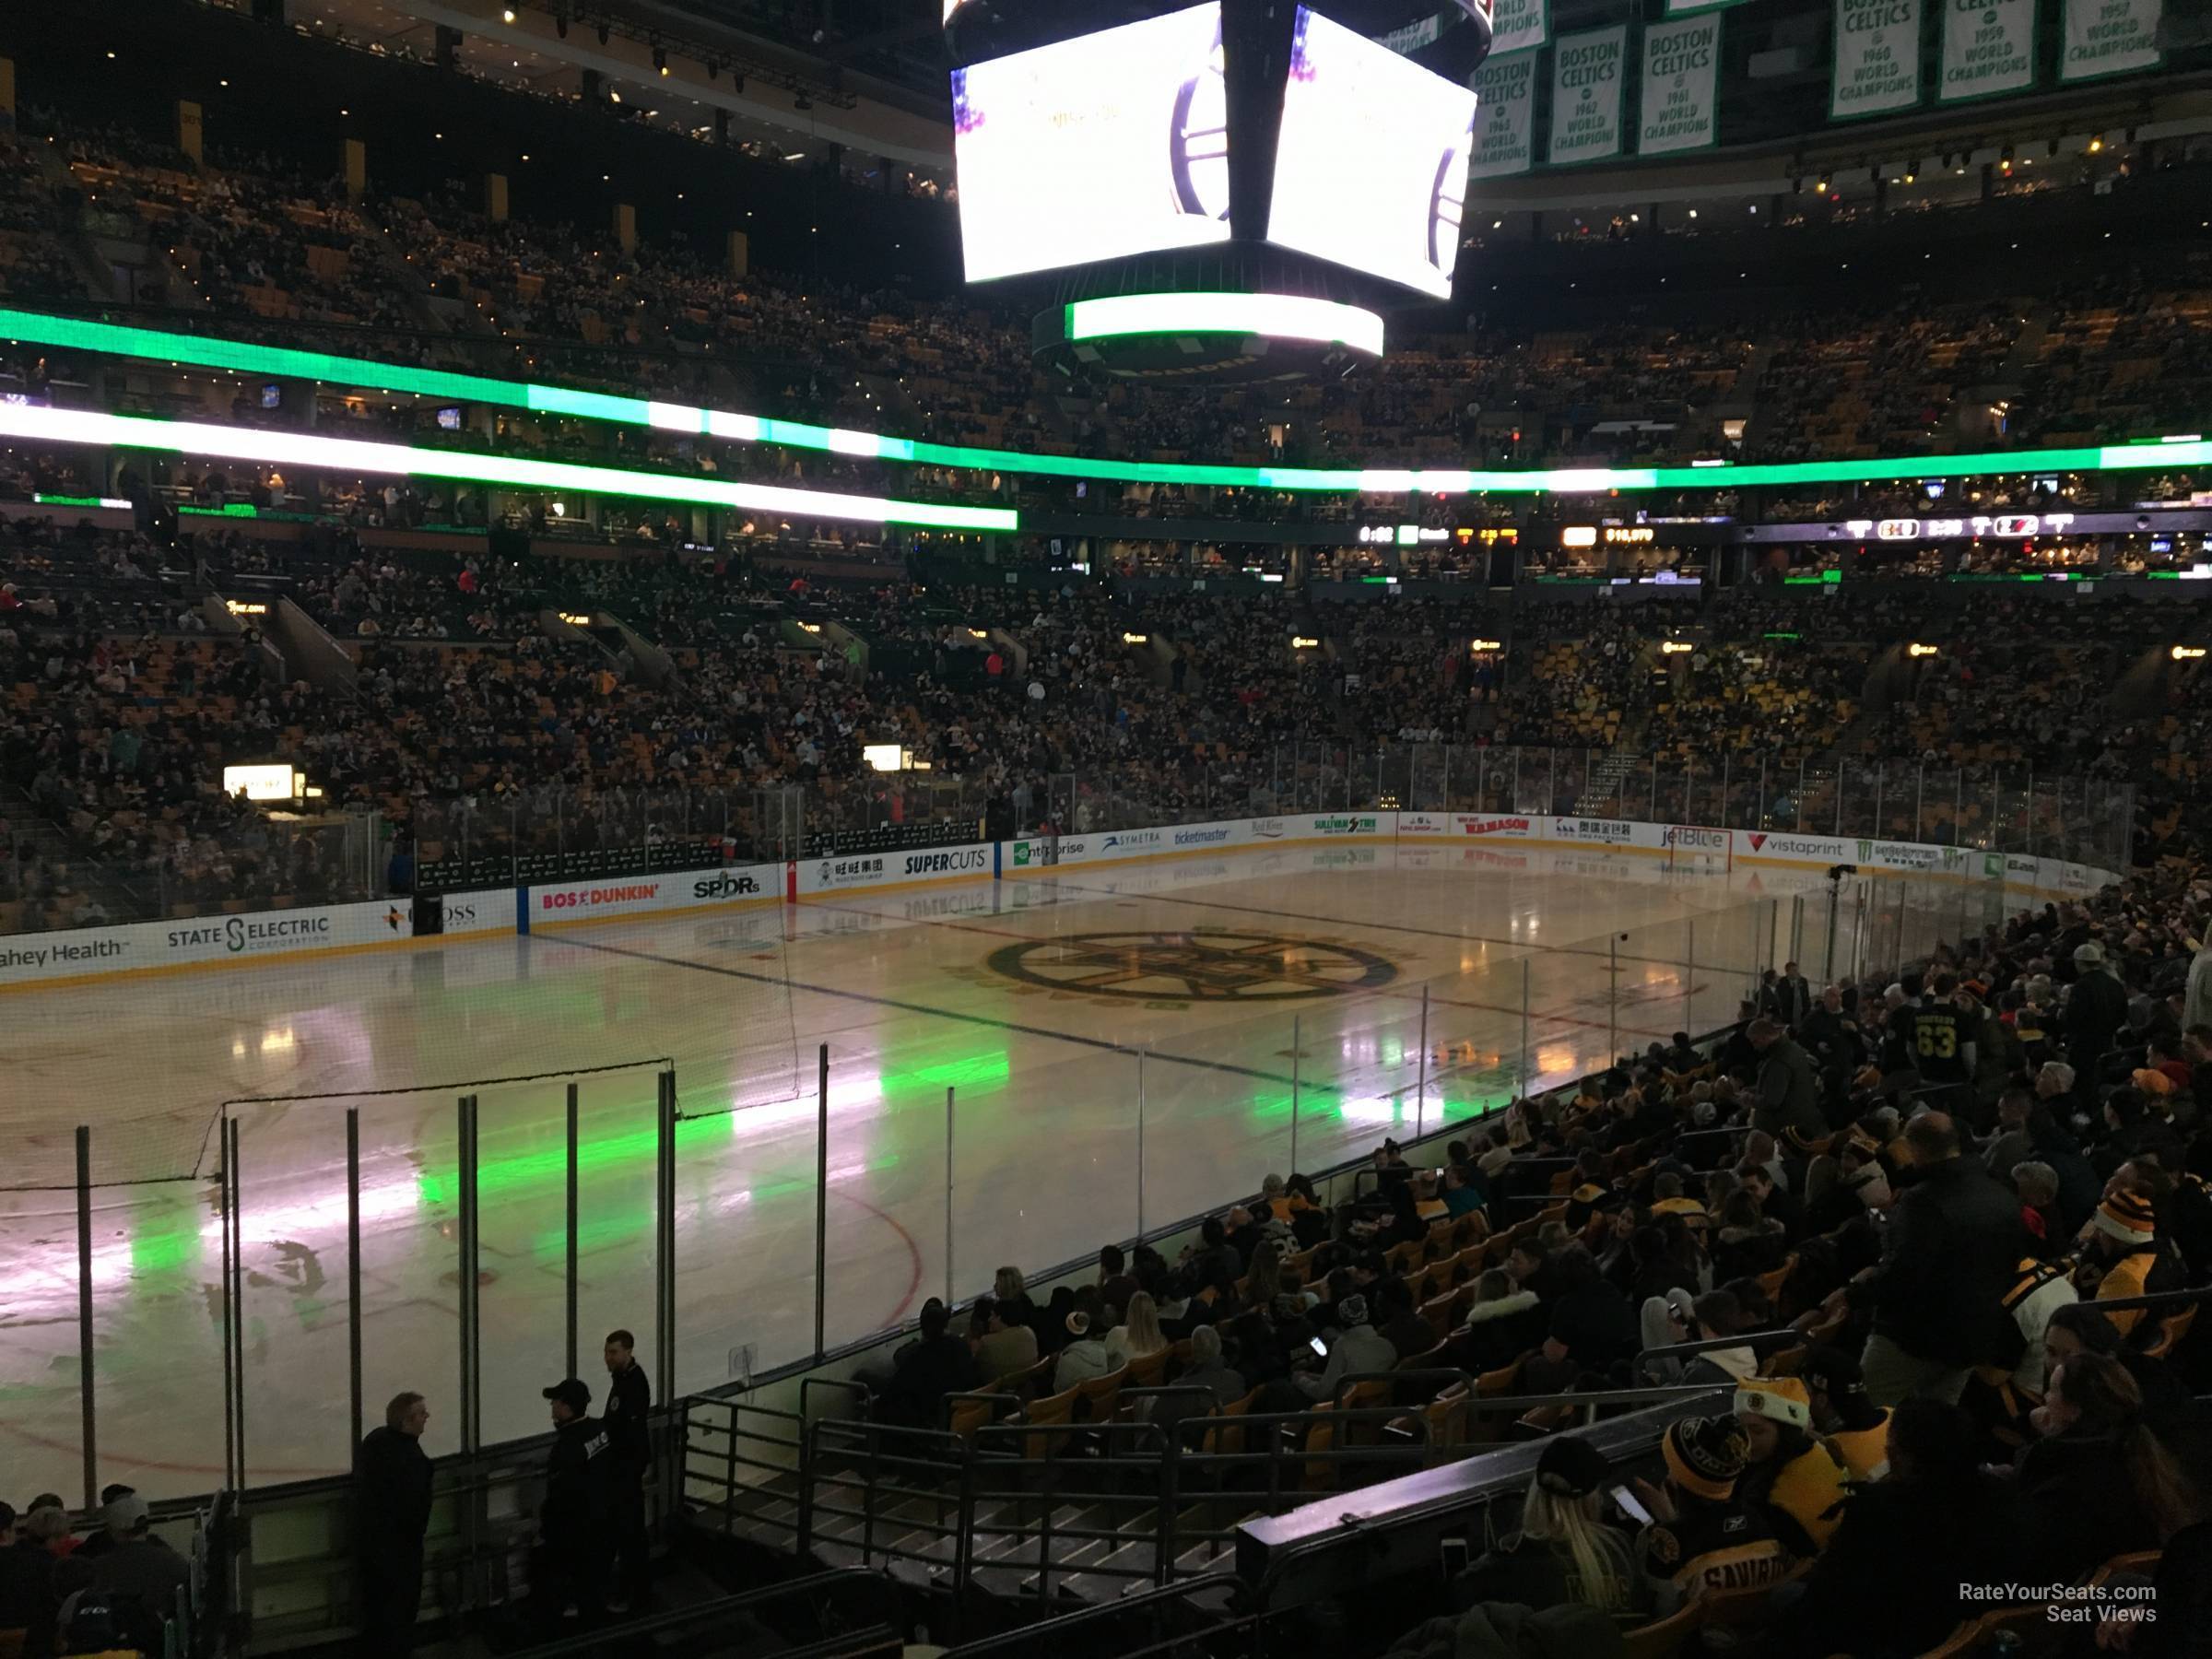 loge 15, row 15 seat view  for hockey - td garden